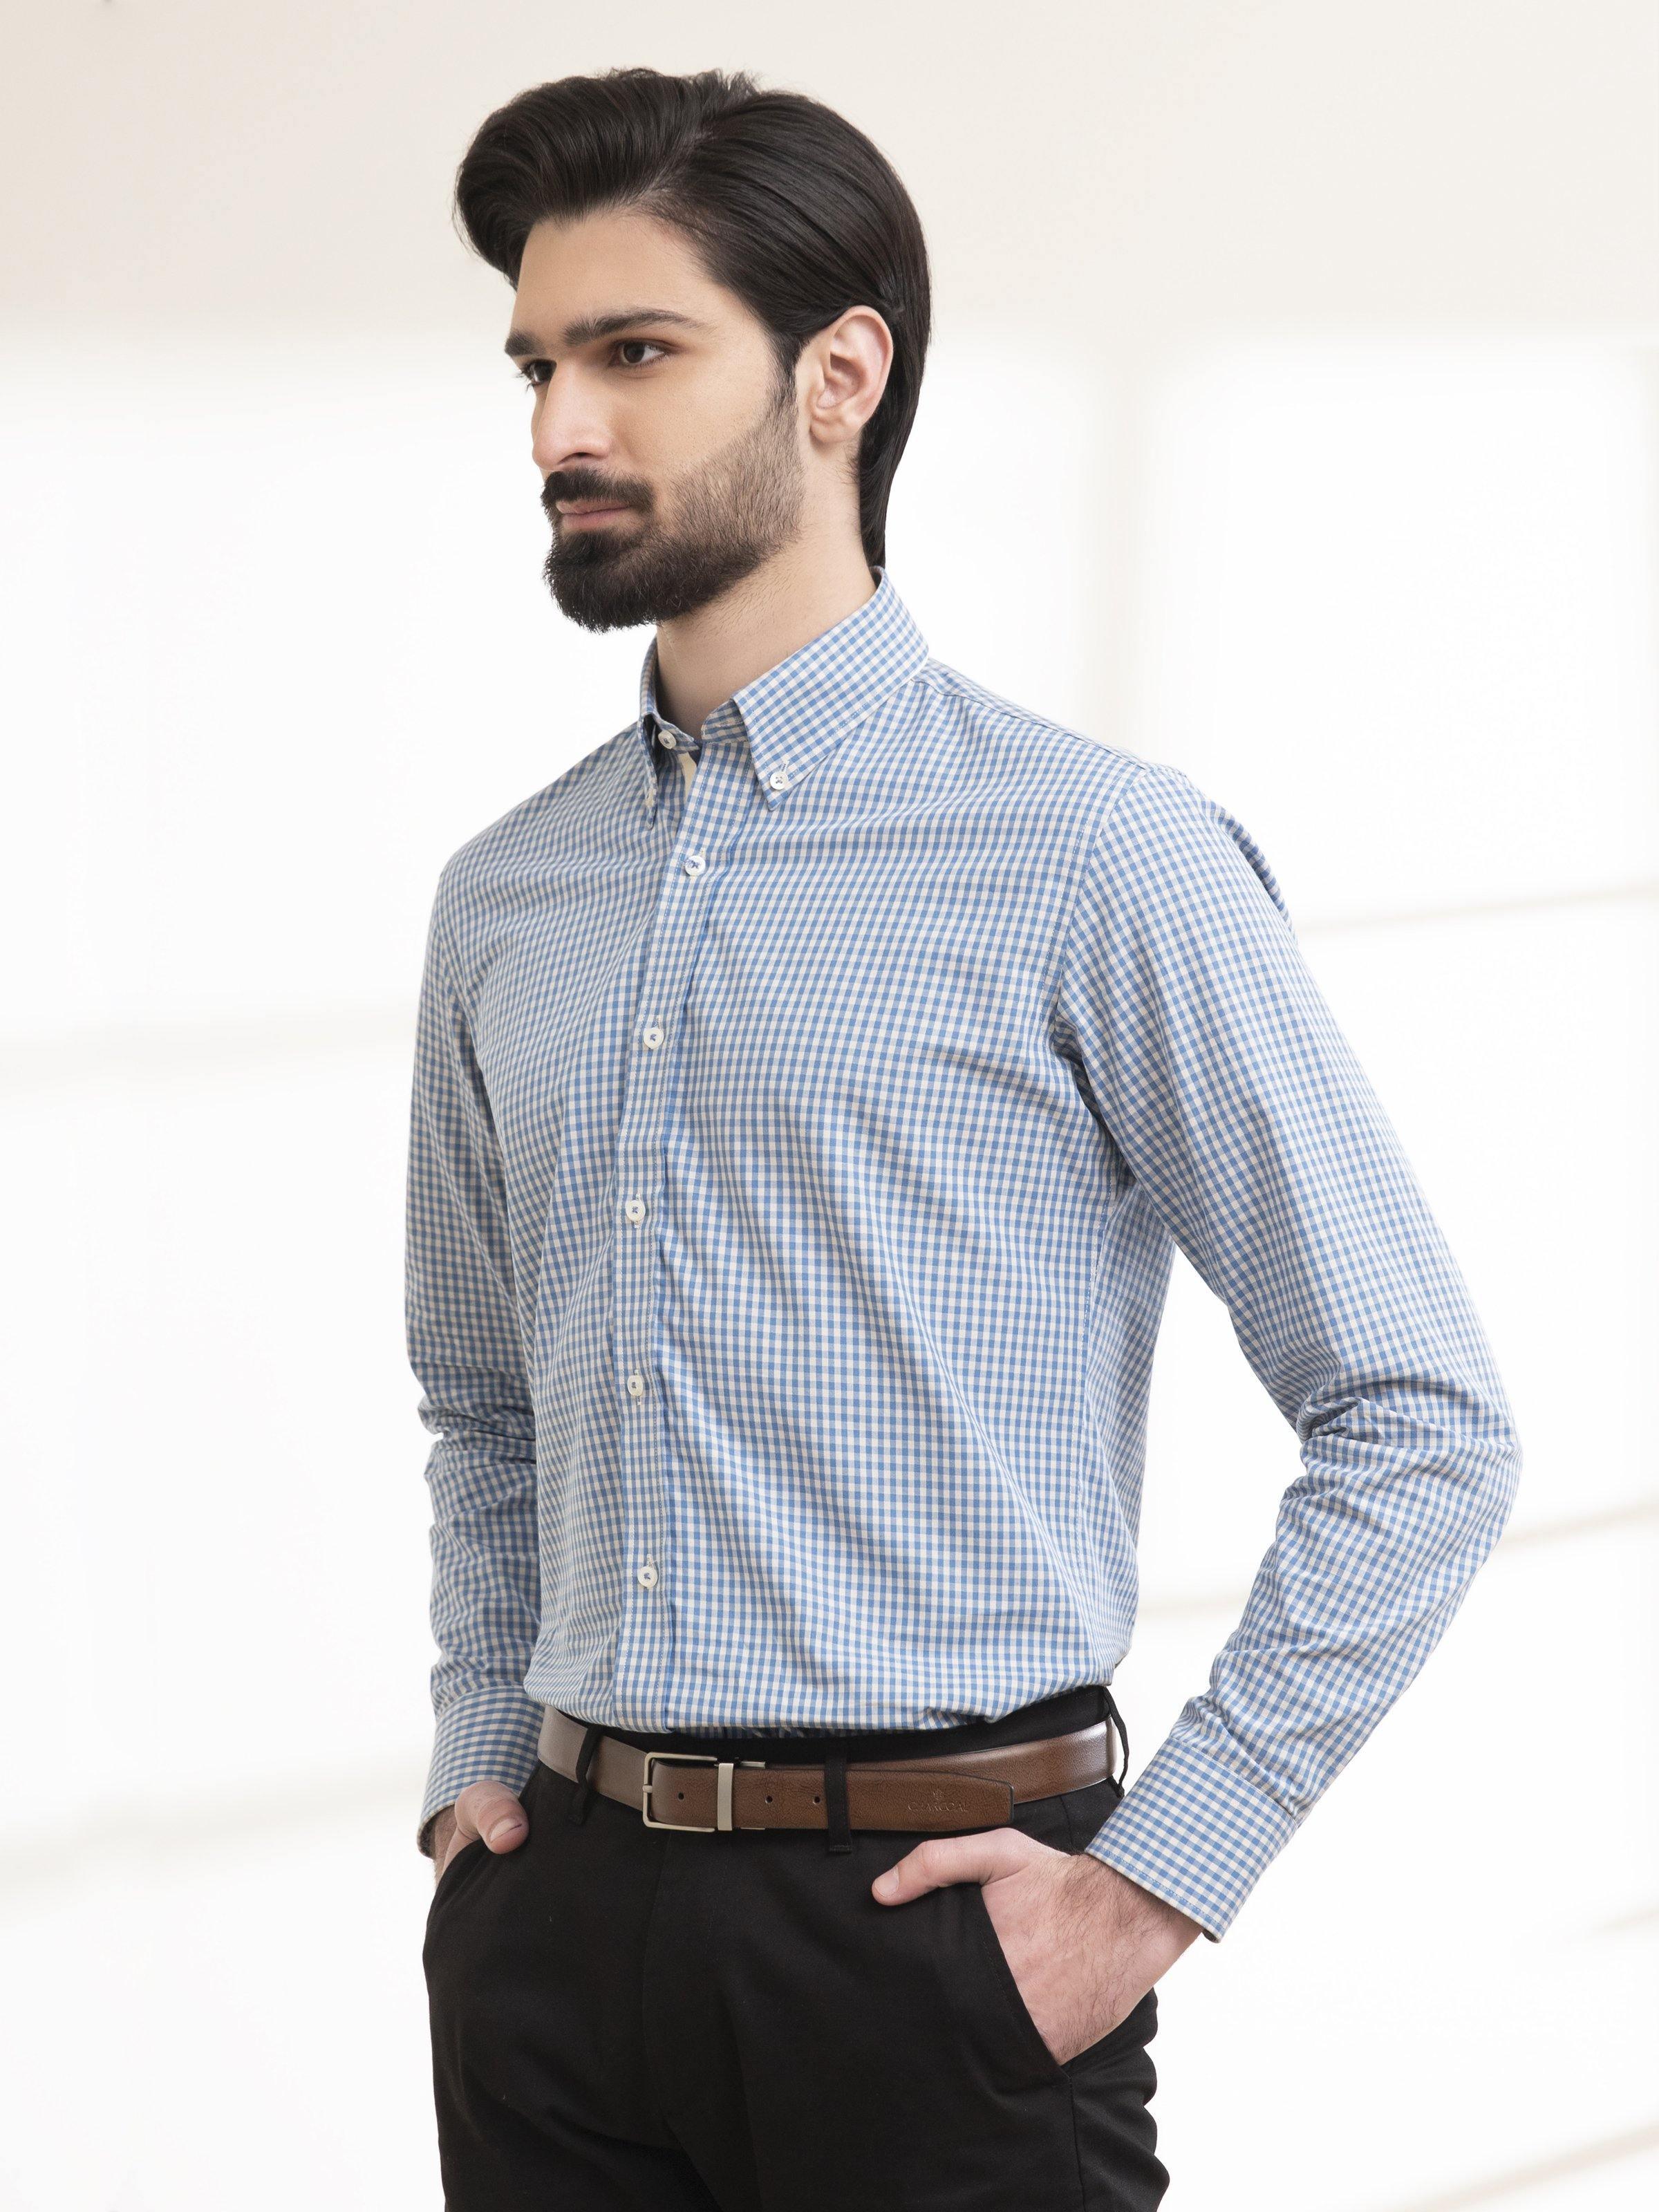 SEMI FORMAL SHIRT FULL SLEEVE BUTTON DOWN BLUE CHECK at Charcoal Clothing